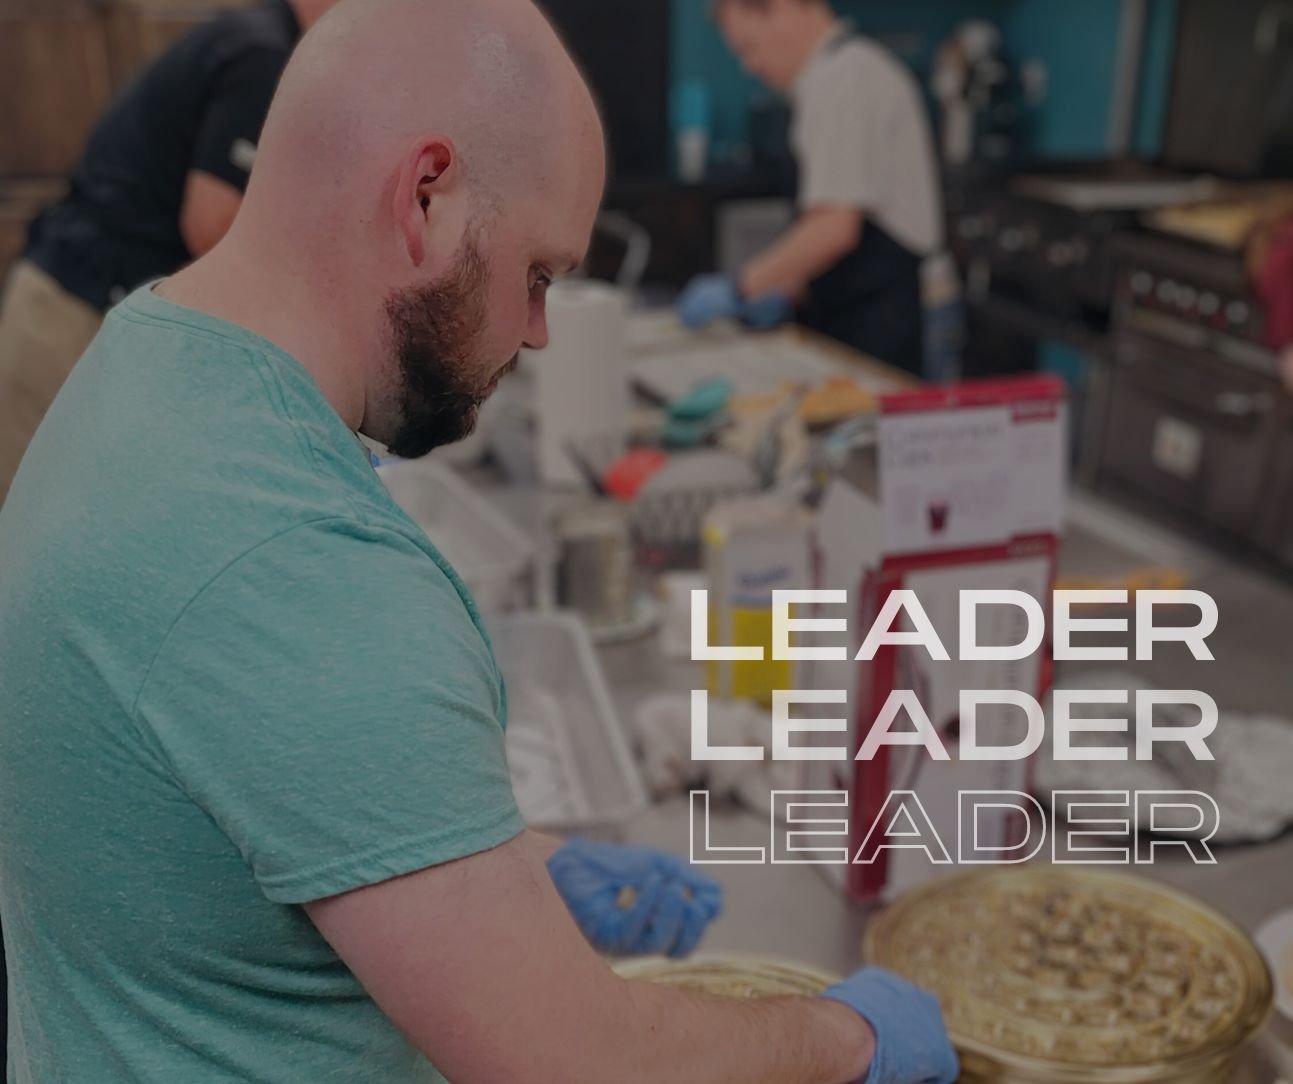 ✨ LEADER SPOTLIGHT ✨

Meet Colin! Colin is one of our deacons here at SSBC. You can find Colin putting together our communion cups on First Sunday, helping in the kitchen, preparing our baptistry when needed, serving in our children's department, or 